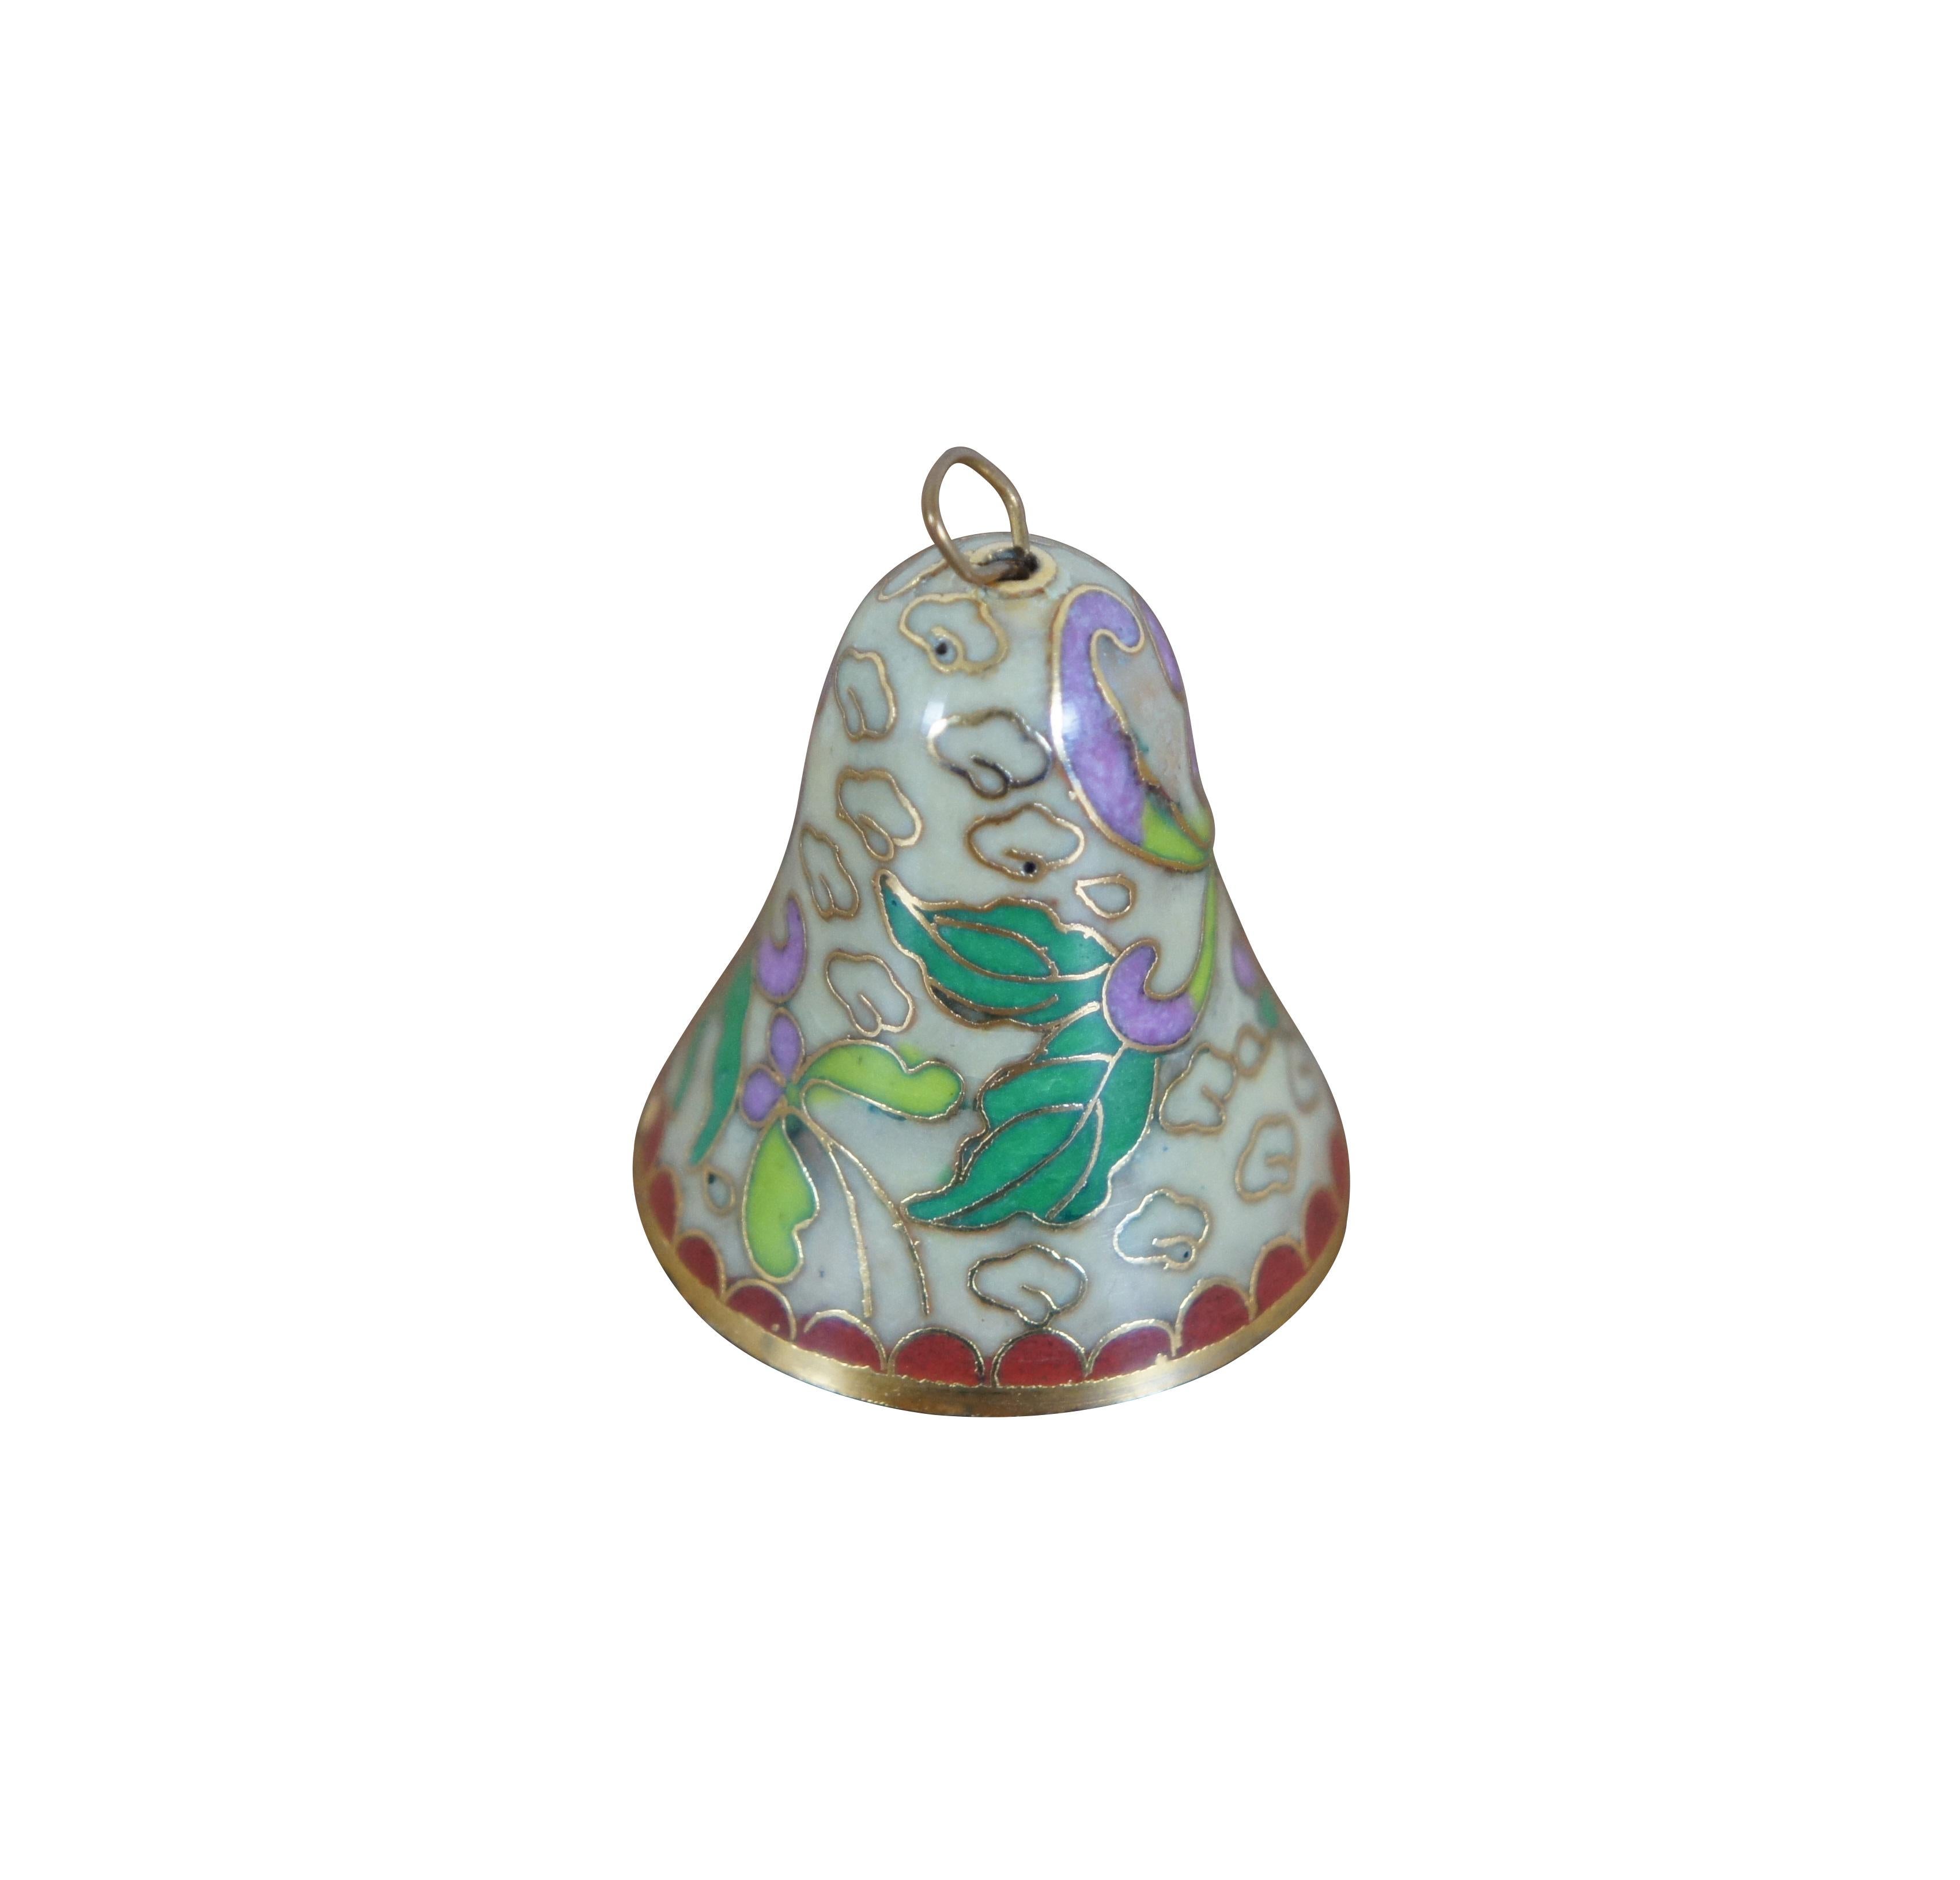 Vintage Chinese cloisonne enamel on brass bell featuring a design of swirling purple and green flowers on a beige backdrop of clouds and red scalloped trim. 

Dimensions:
1.125